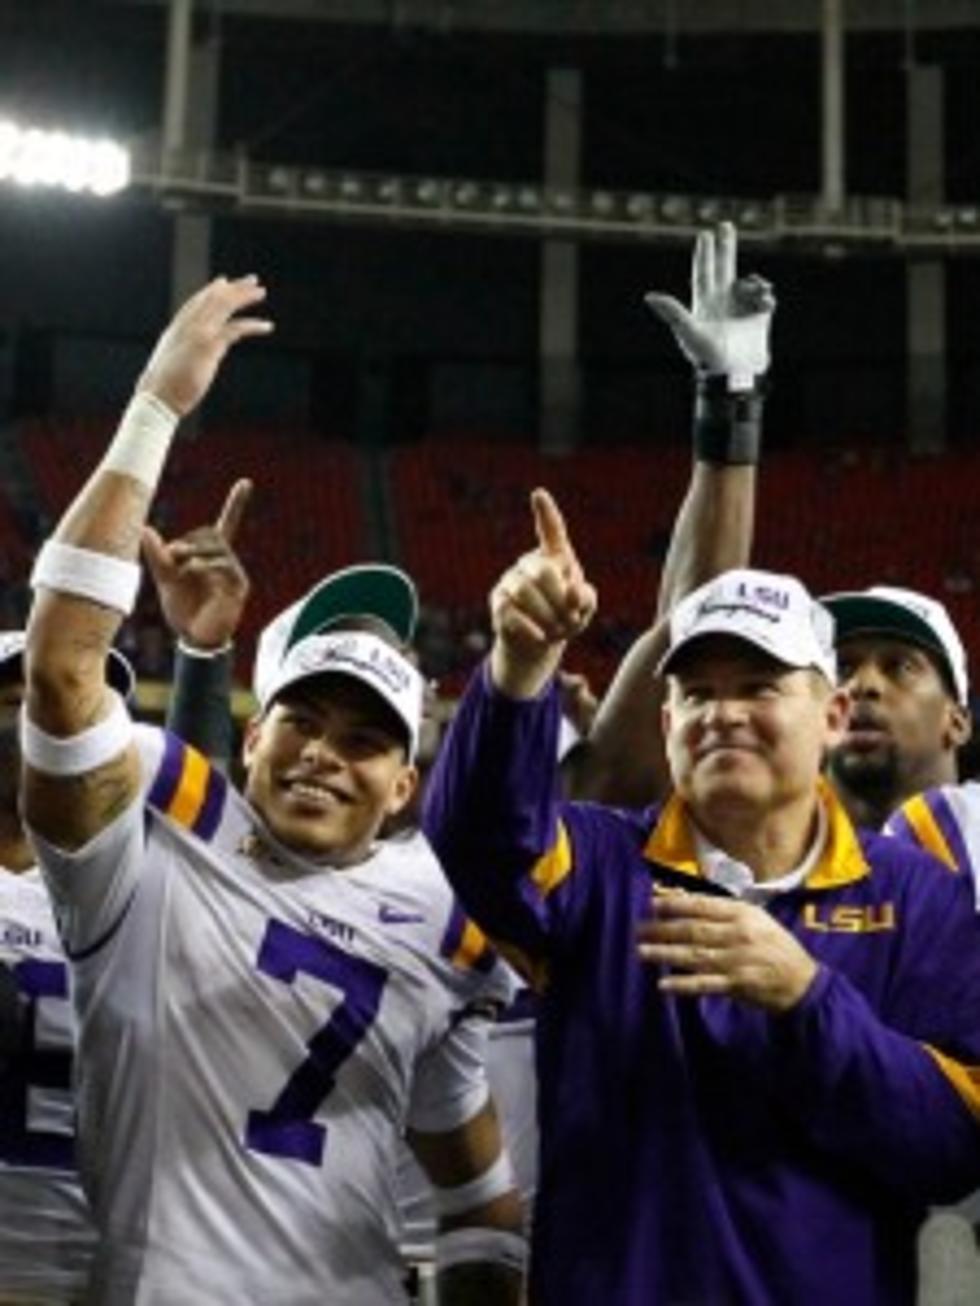 Les Miles Mum On Possible Mathieu Return To Tigers